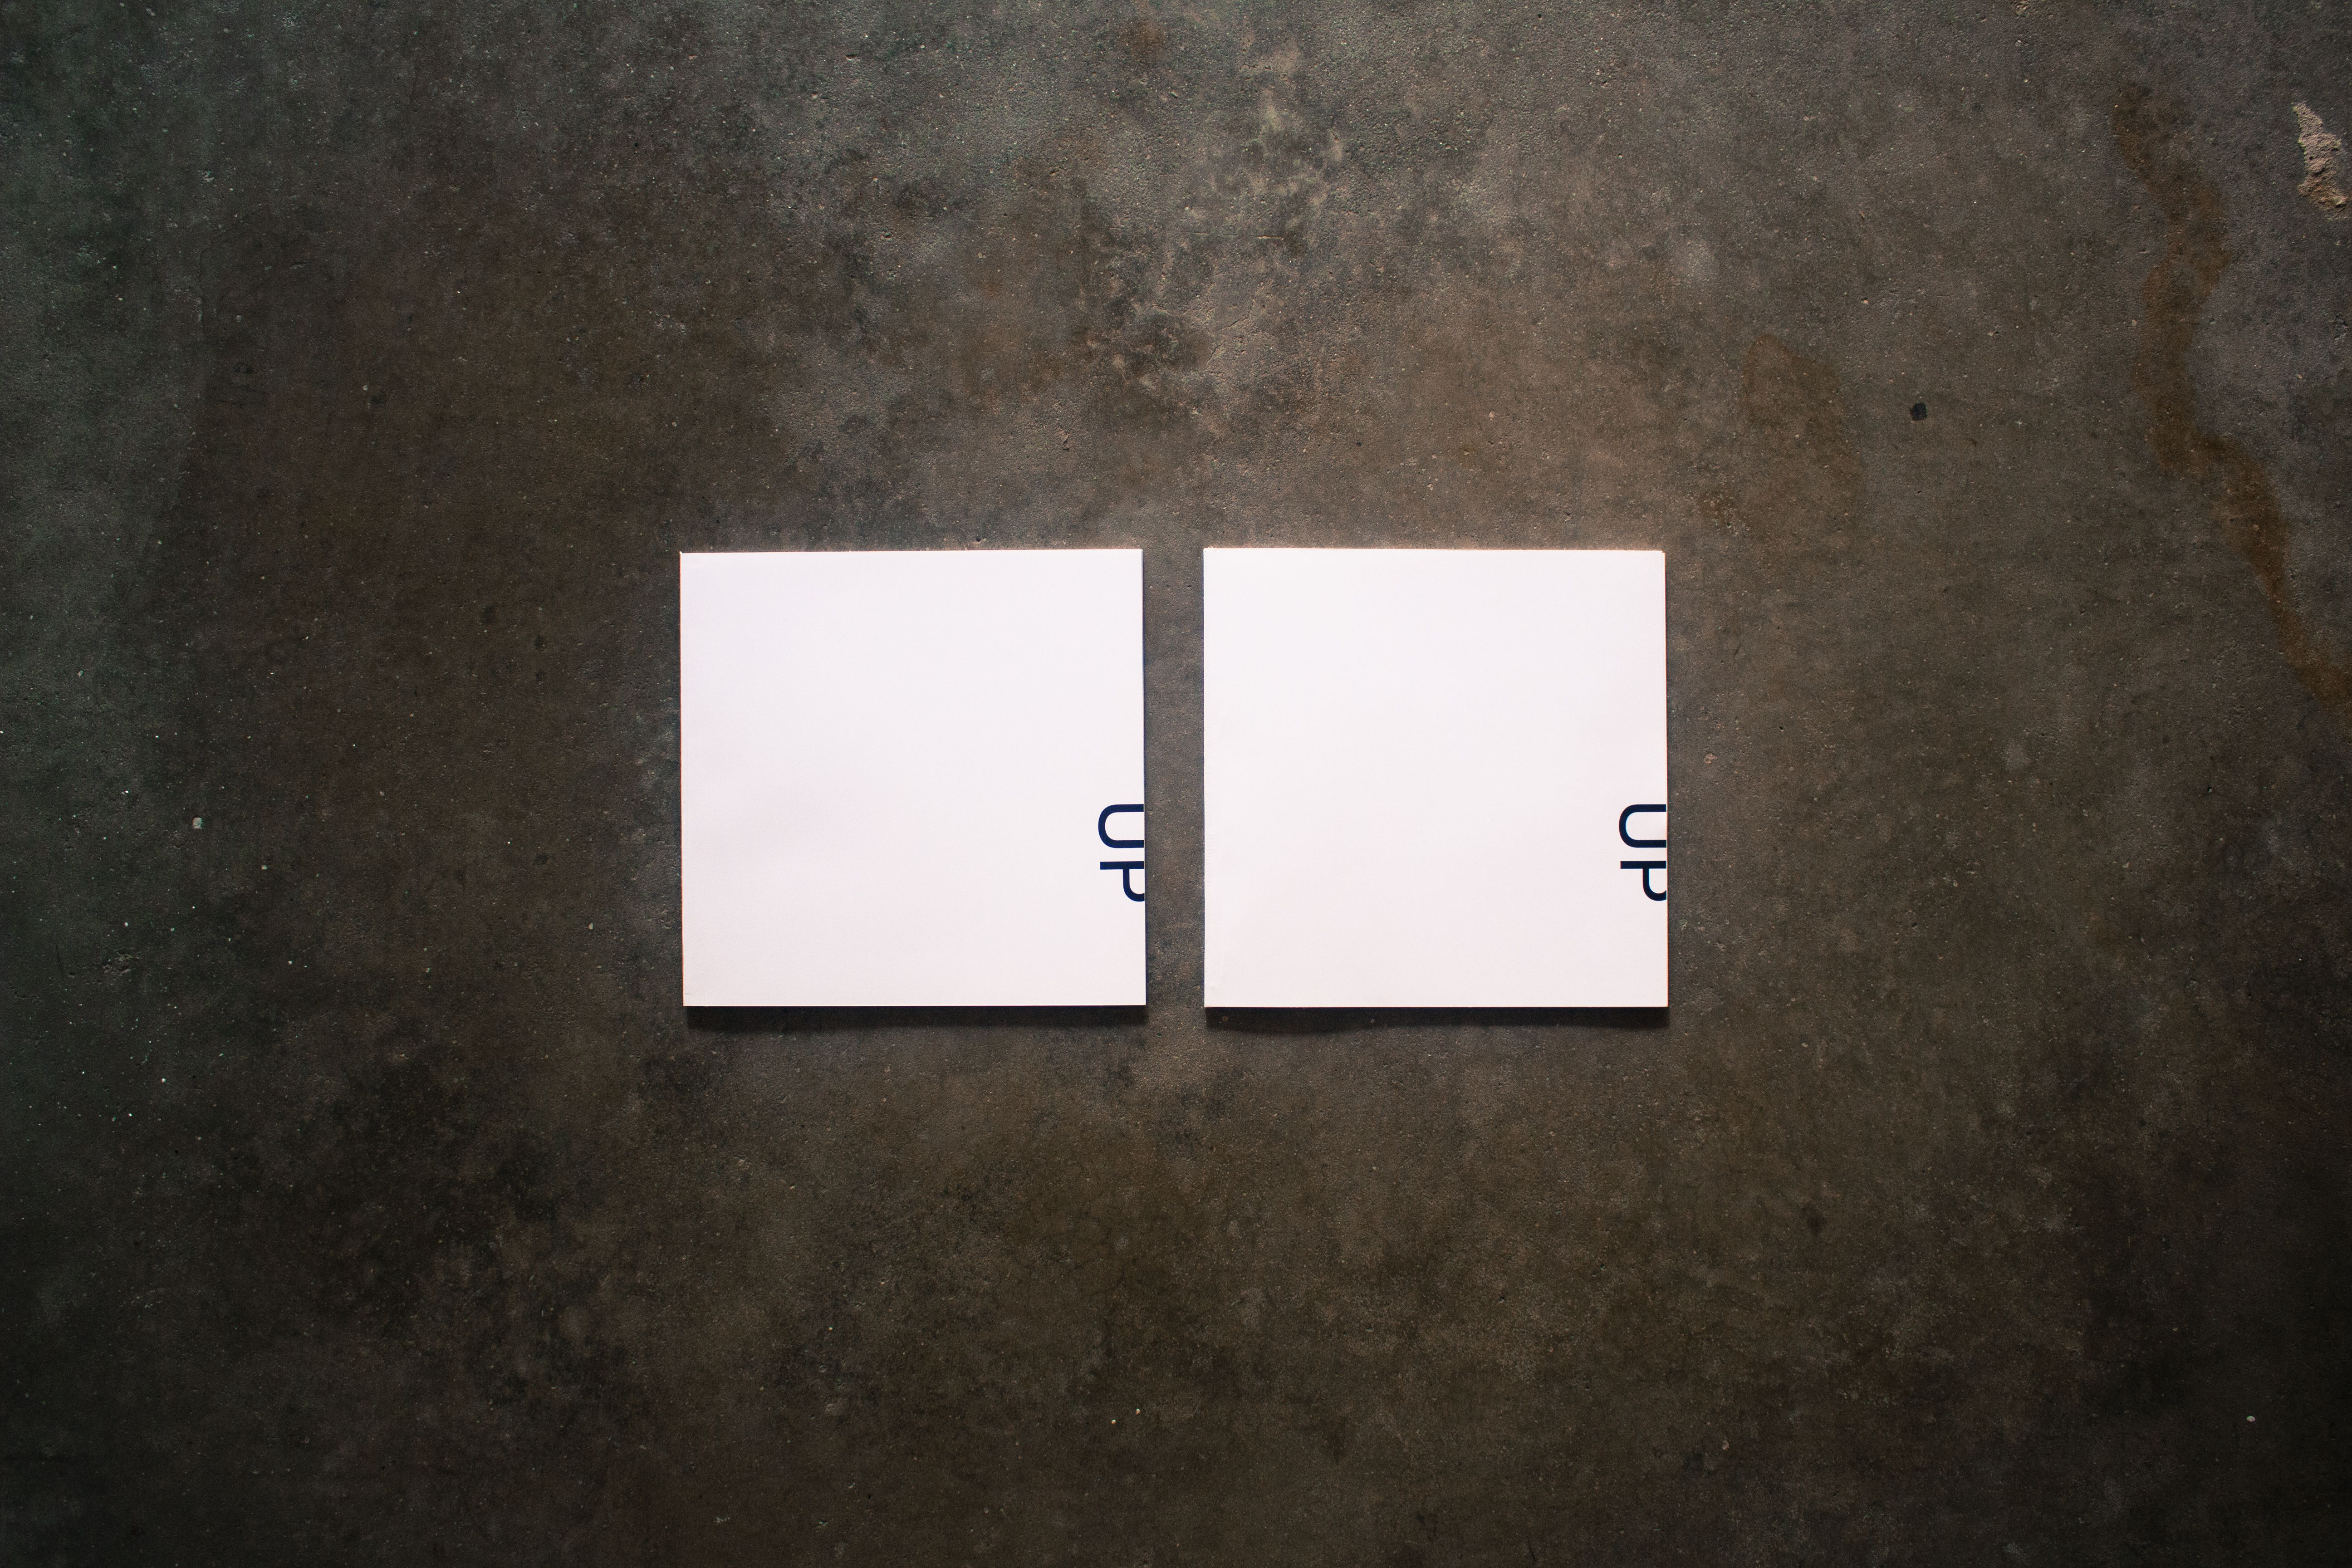 Two books on a concrete background. The covers are square, about 11 inches by 11 inches. The covers are white paper. The title of the book, UP, is printed in simple black letters, rotated sideways.